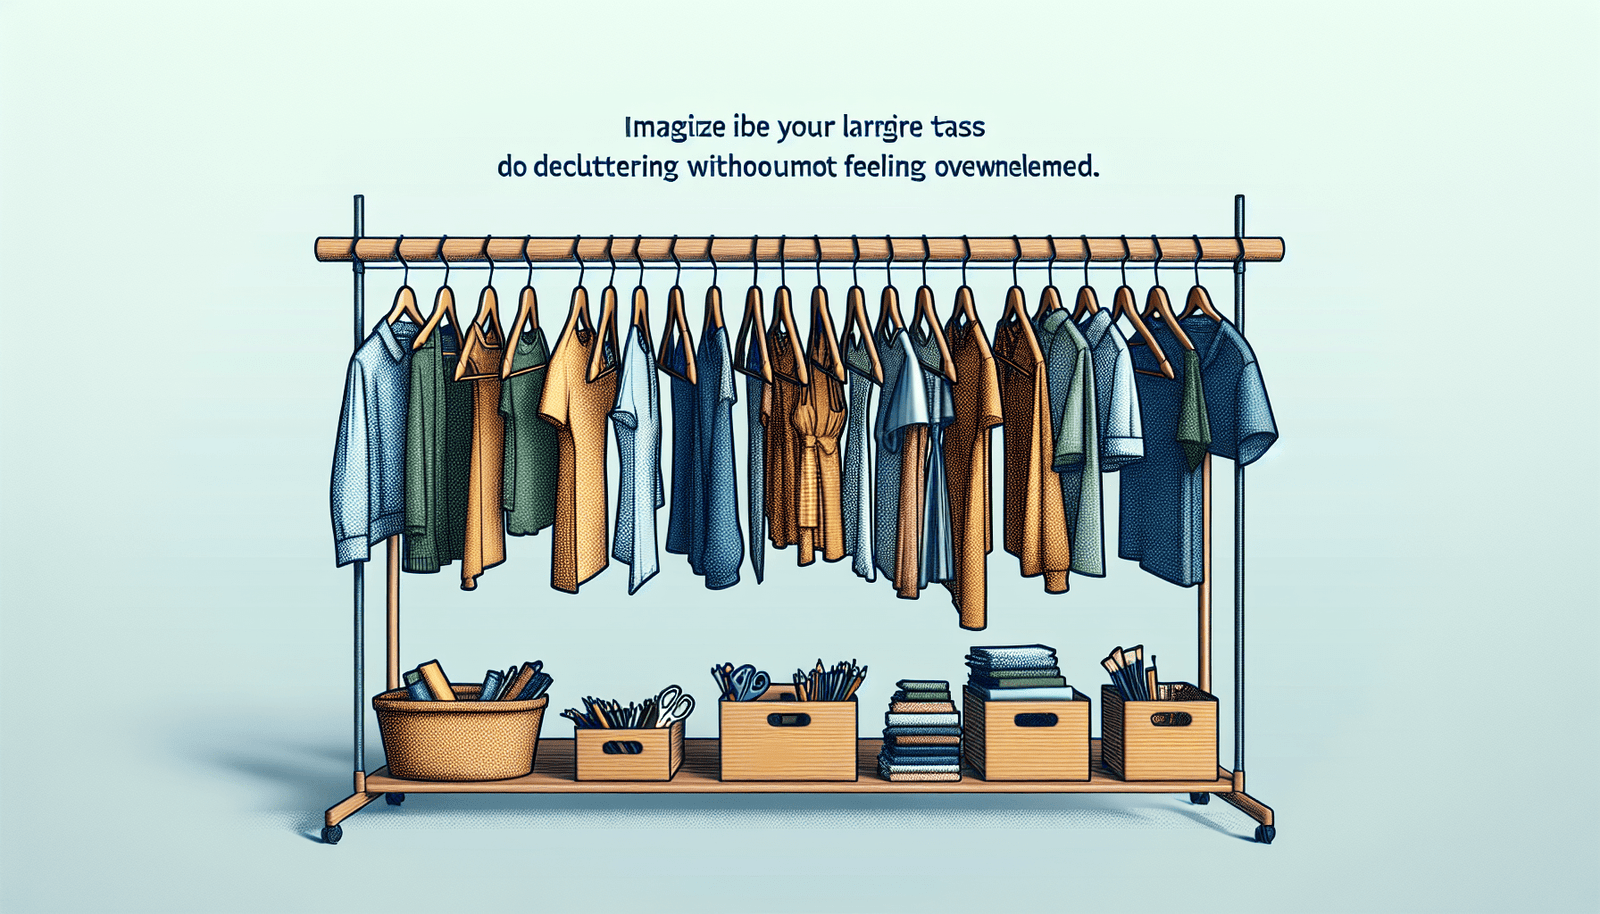 How Can I Declutter My Closet Without Feeling Overwhelmed?